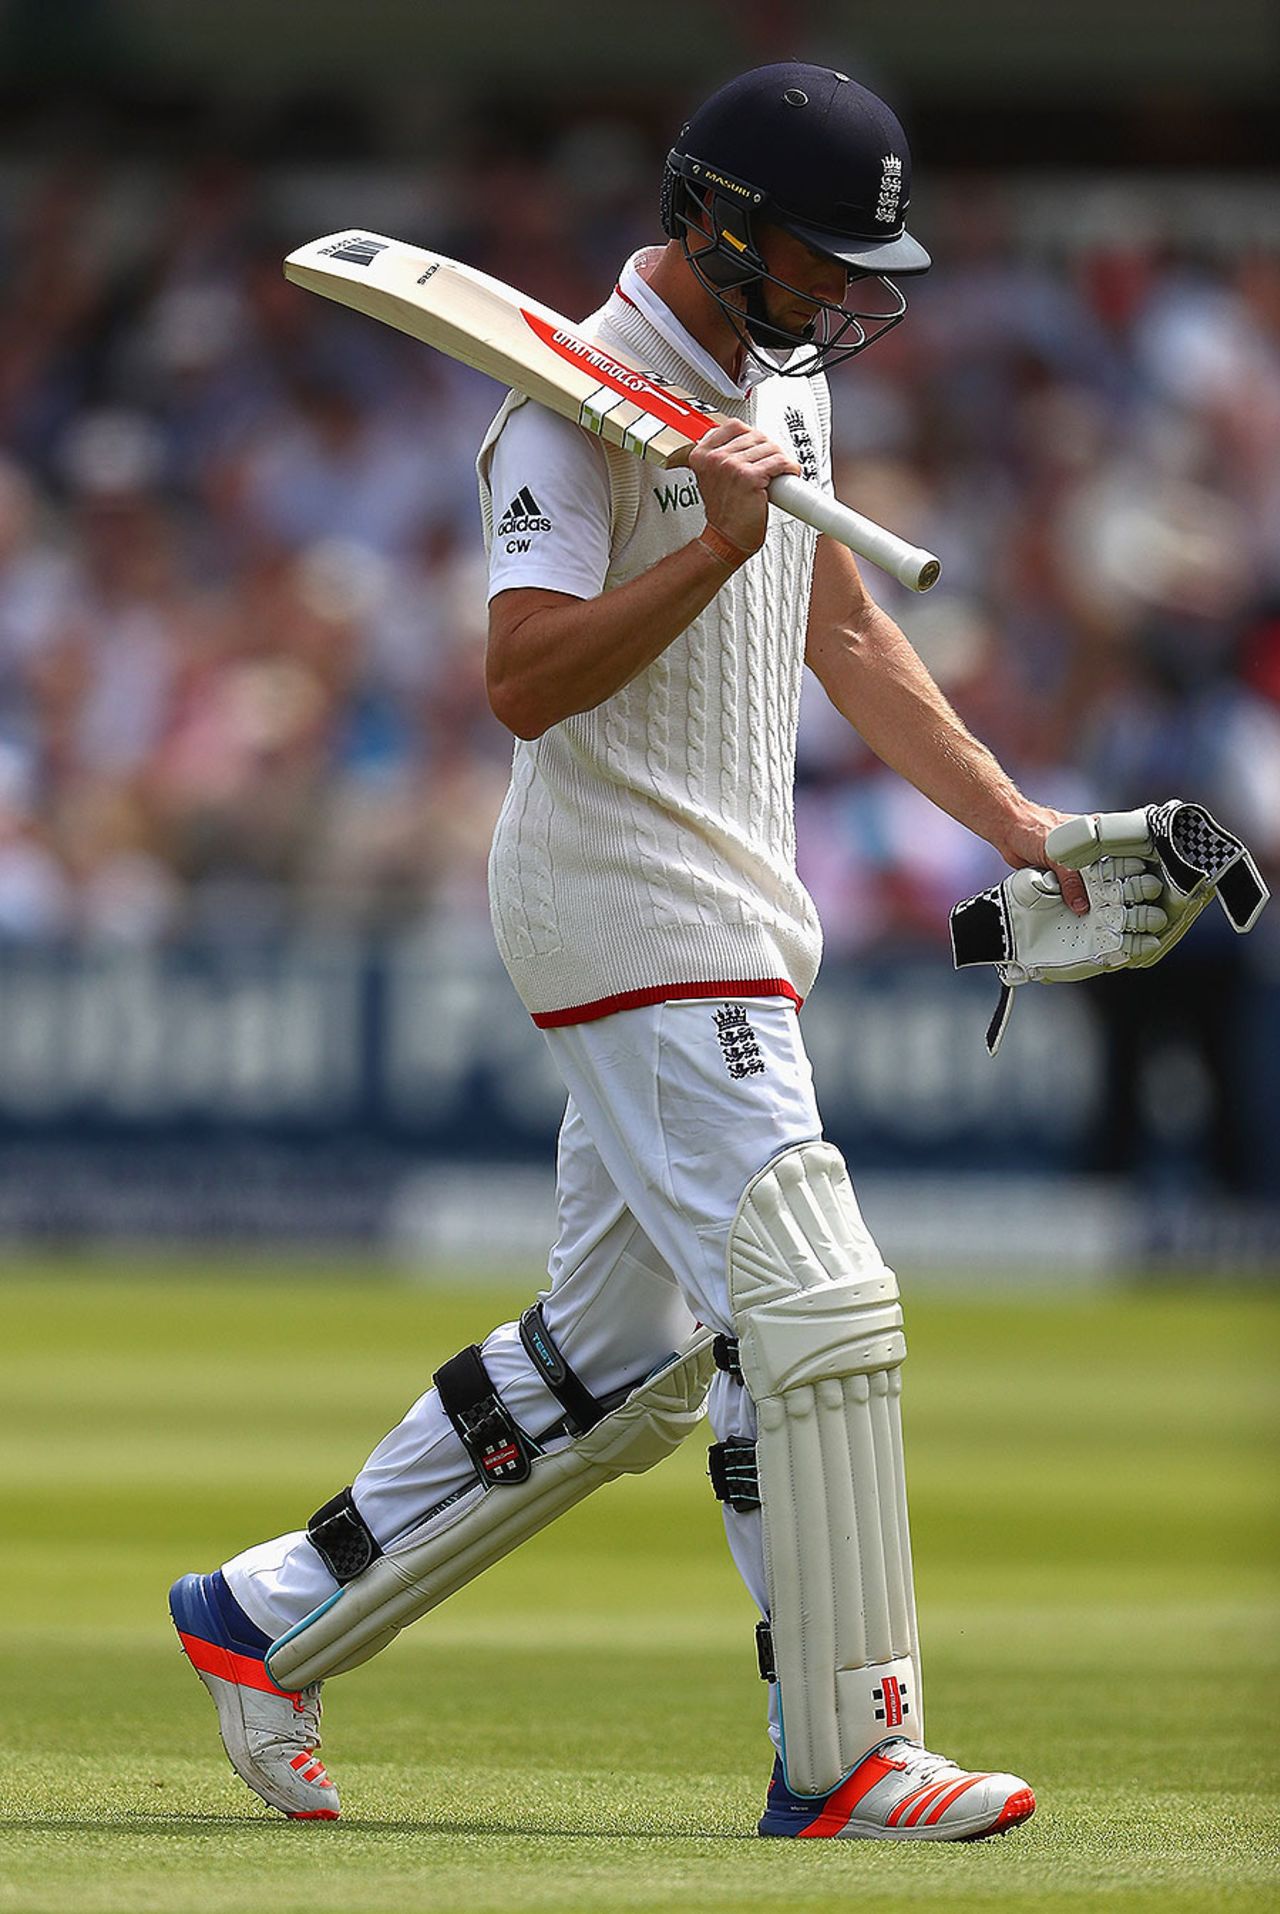 Chris Woakes fell for 66, his Test-best score, England v Sri Lanka, 3rd Investec Test, Lord's, 2nd day, June 10, 2016